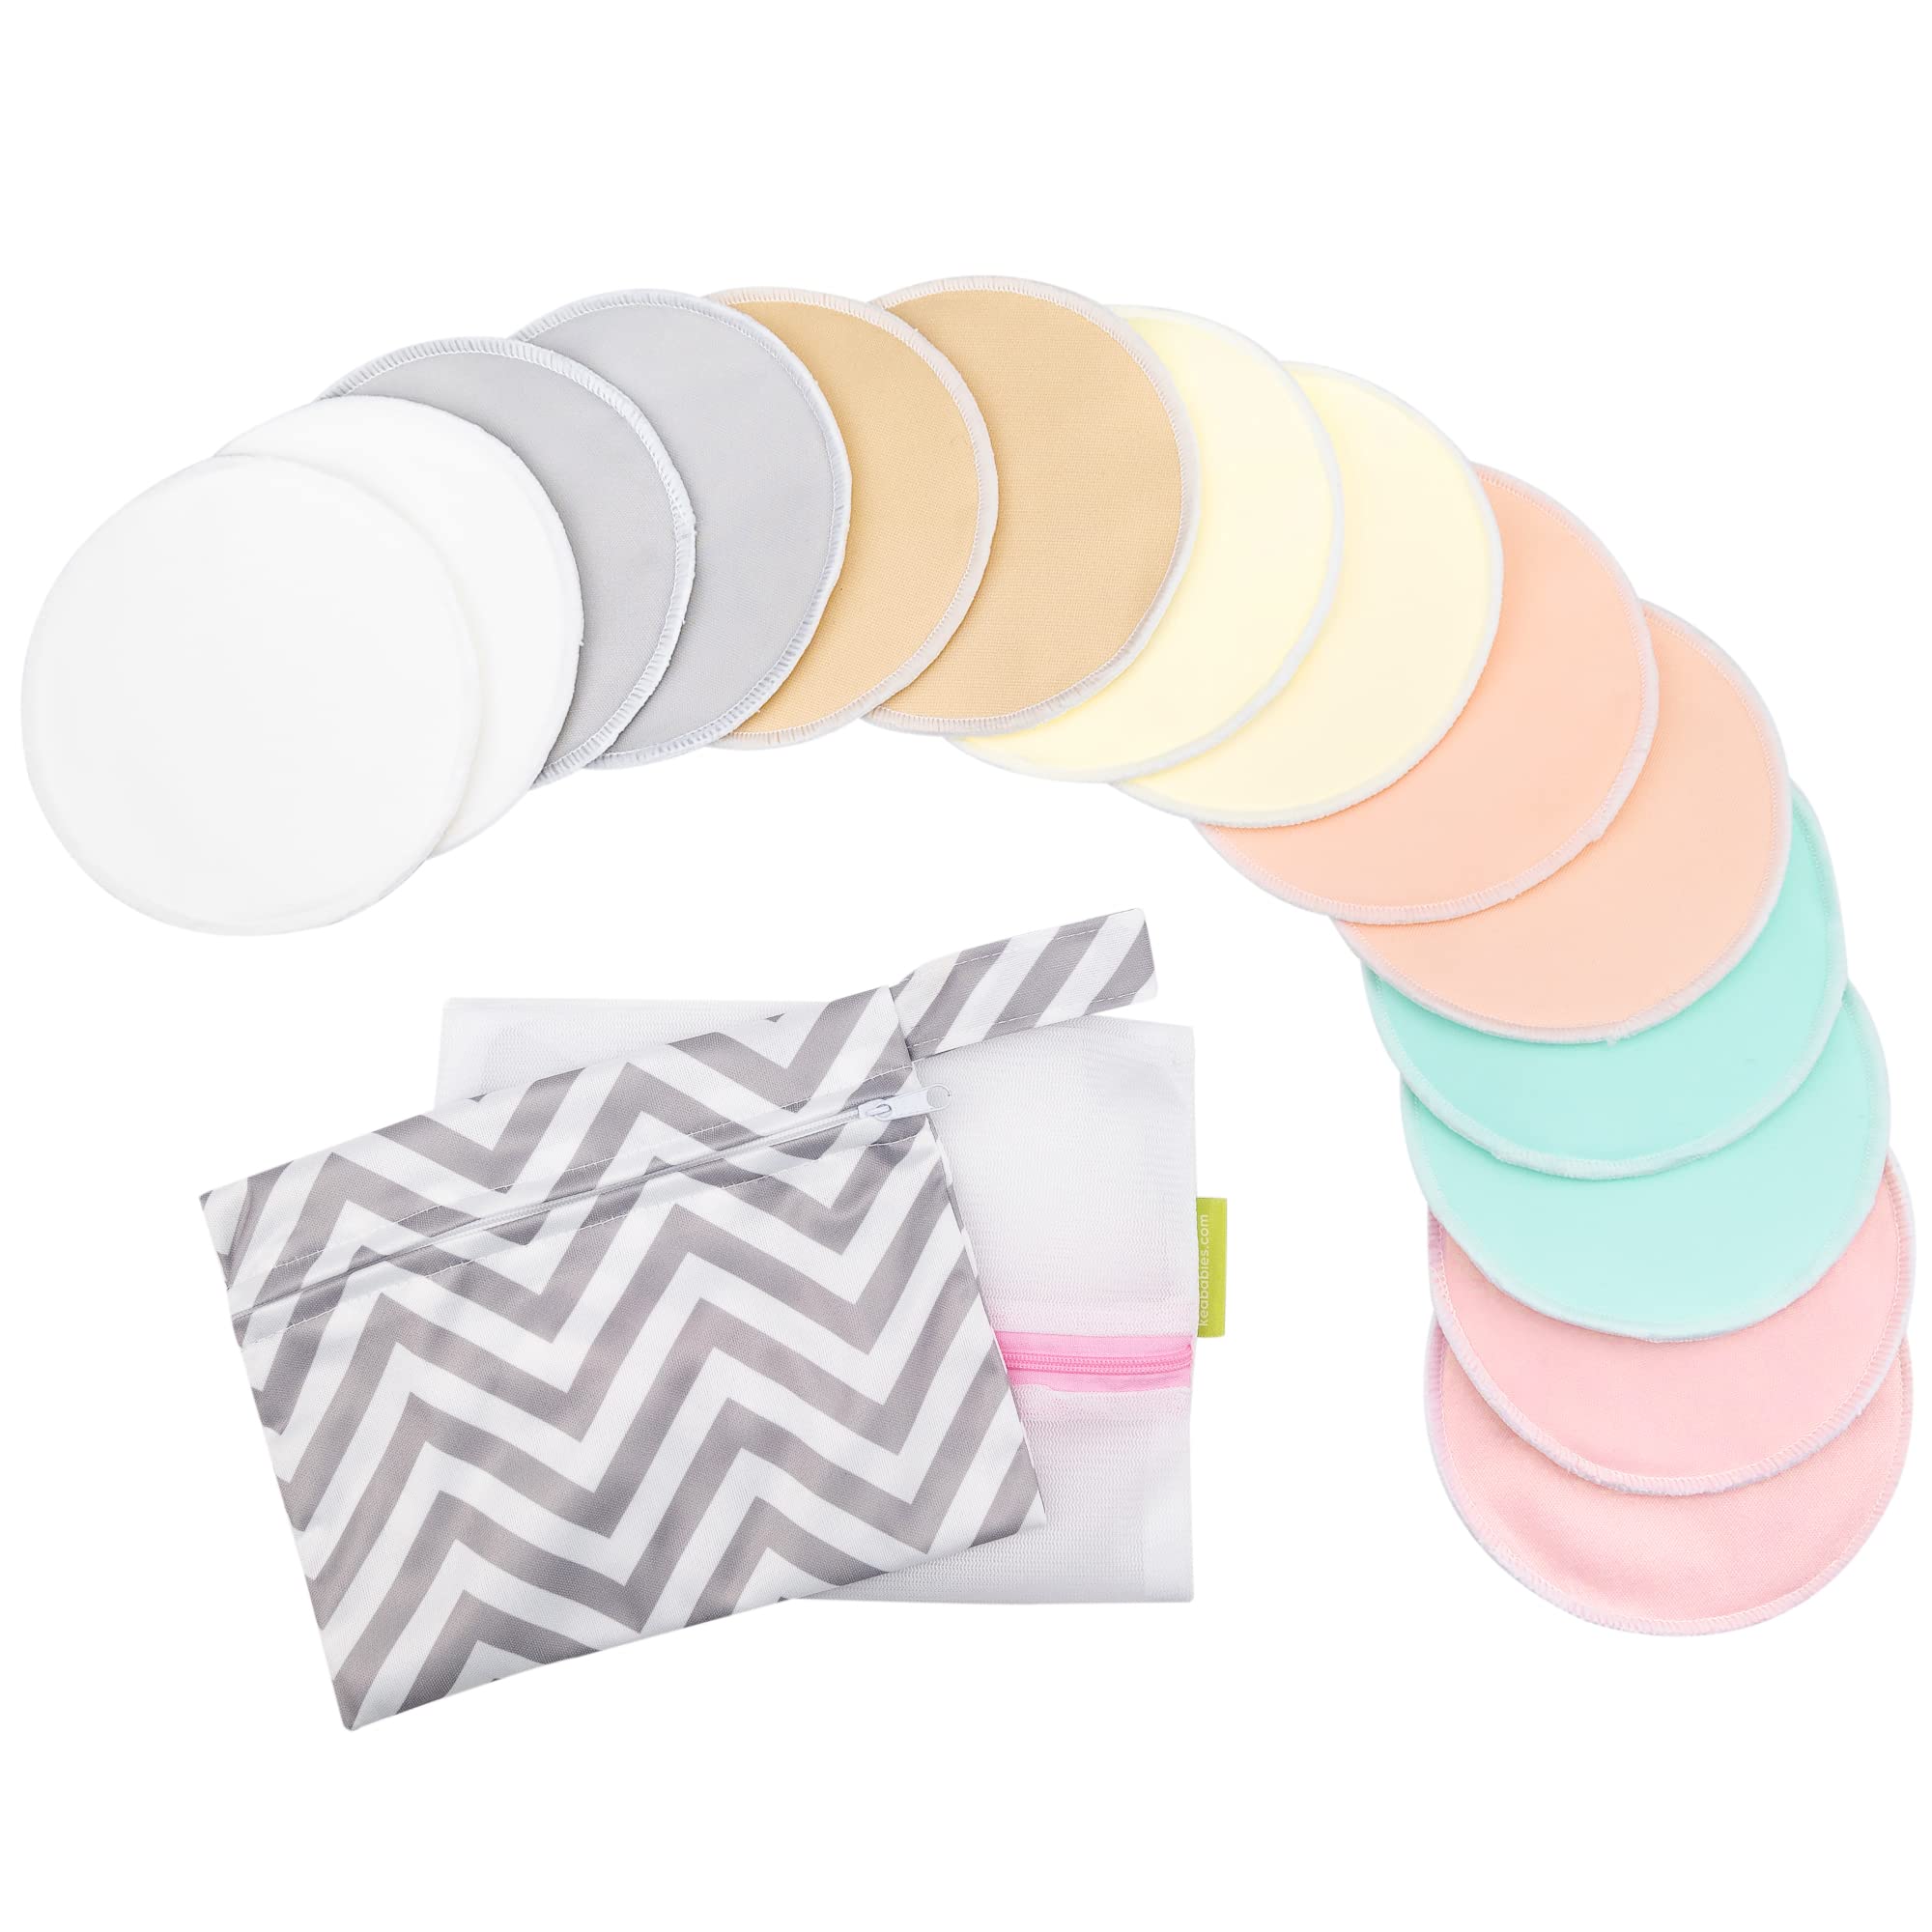 Washable Reusable Bamboo Nursing Pads, Organic Bamboo Breastfeeding Pads, 4  Flower Pads, 10 Pack with 2 Pouches & E-Book